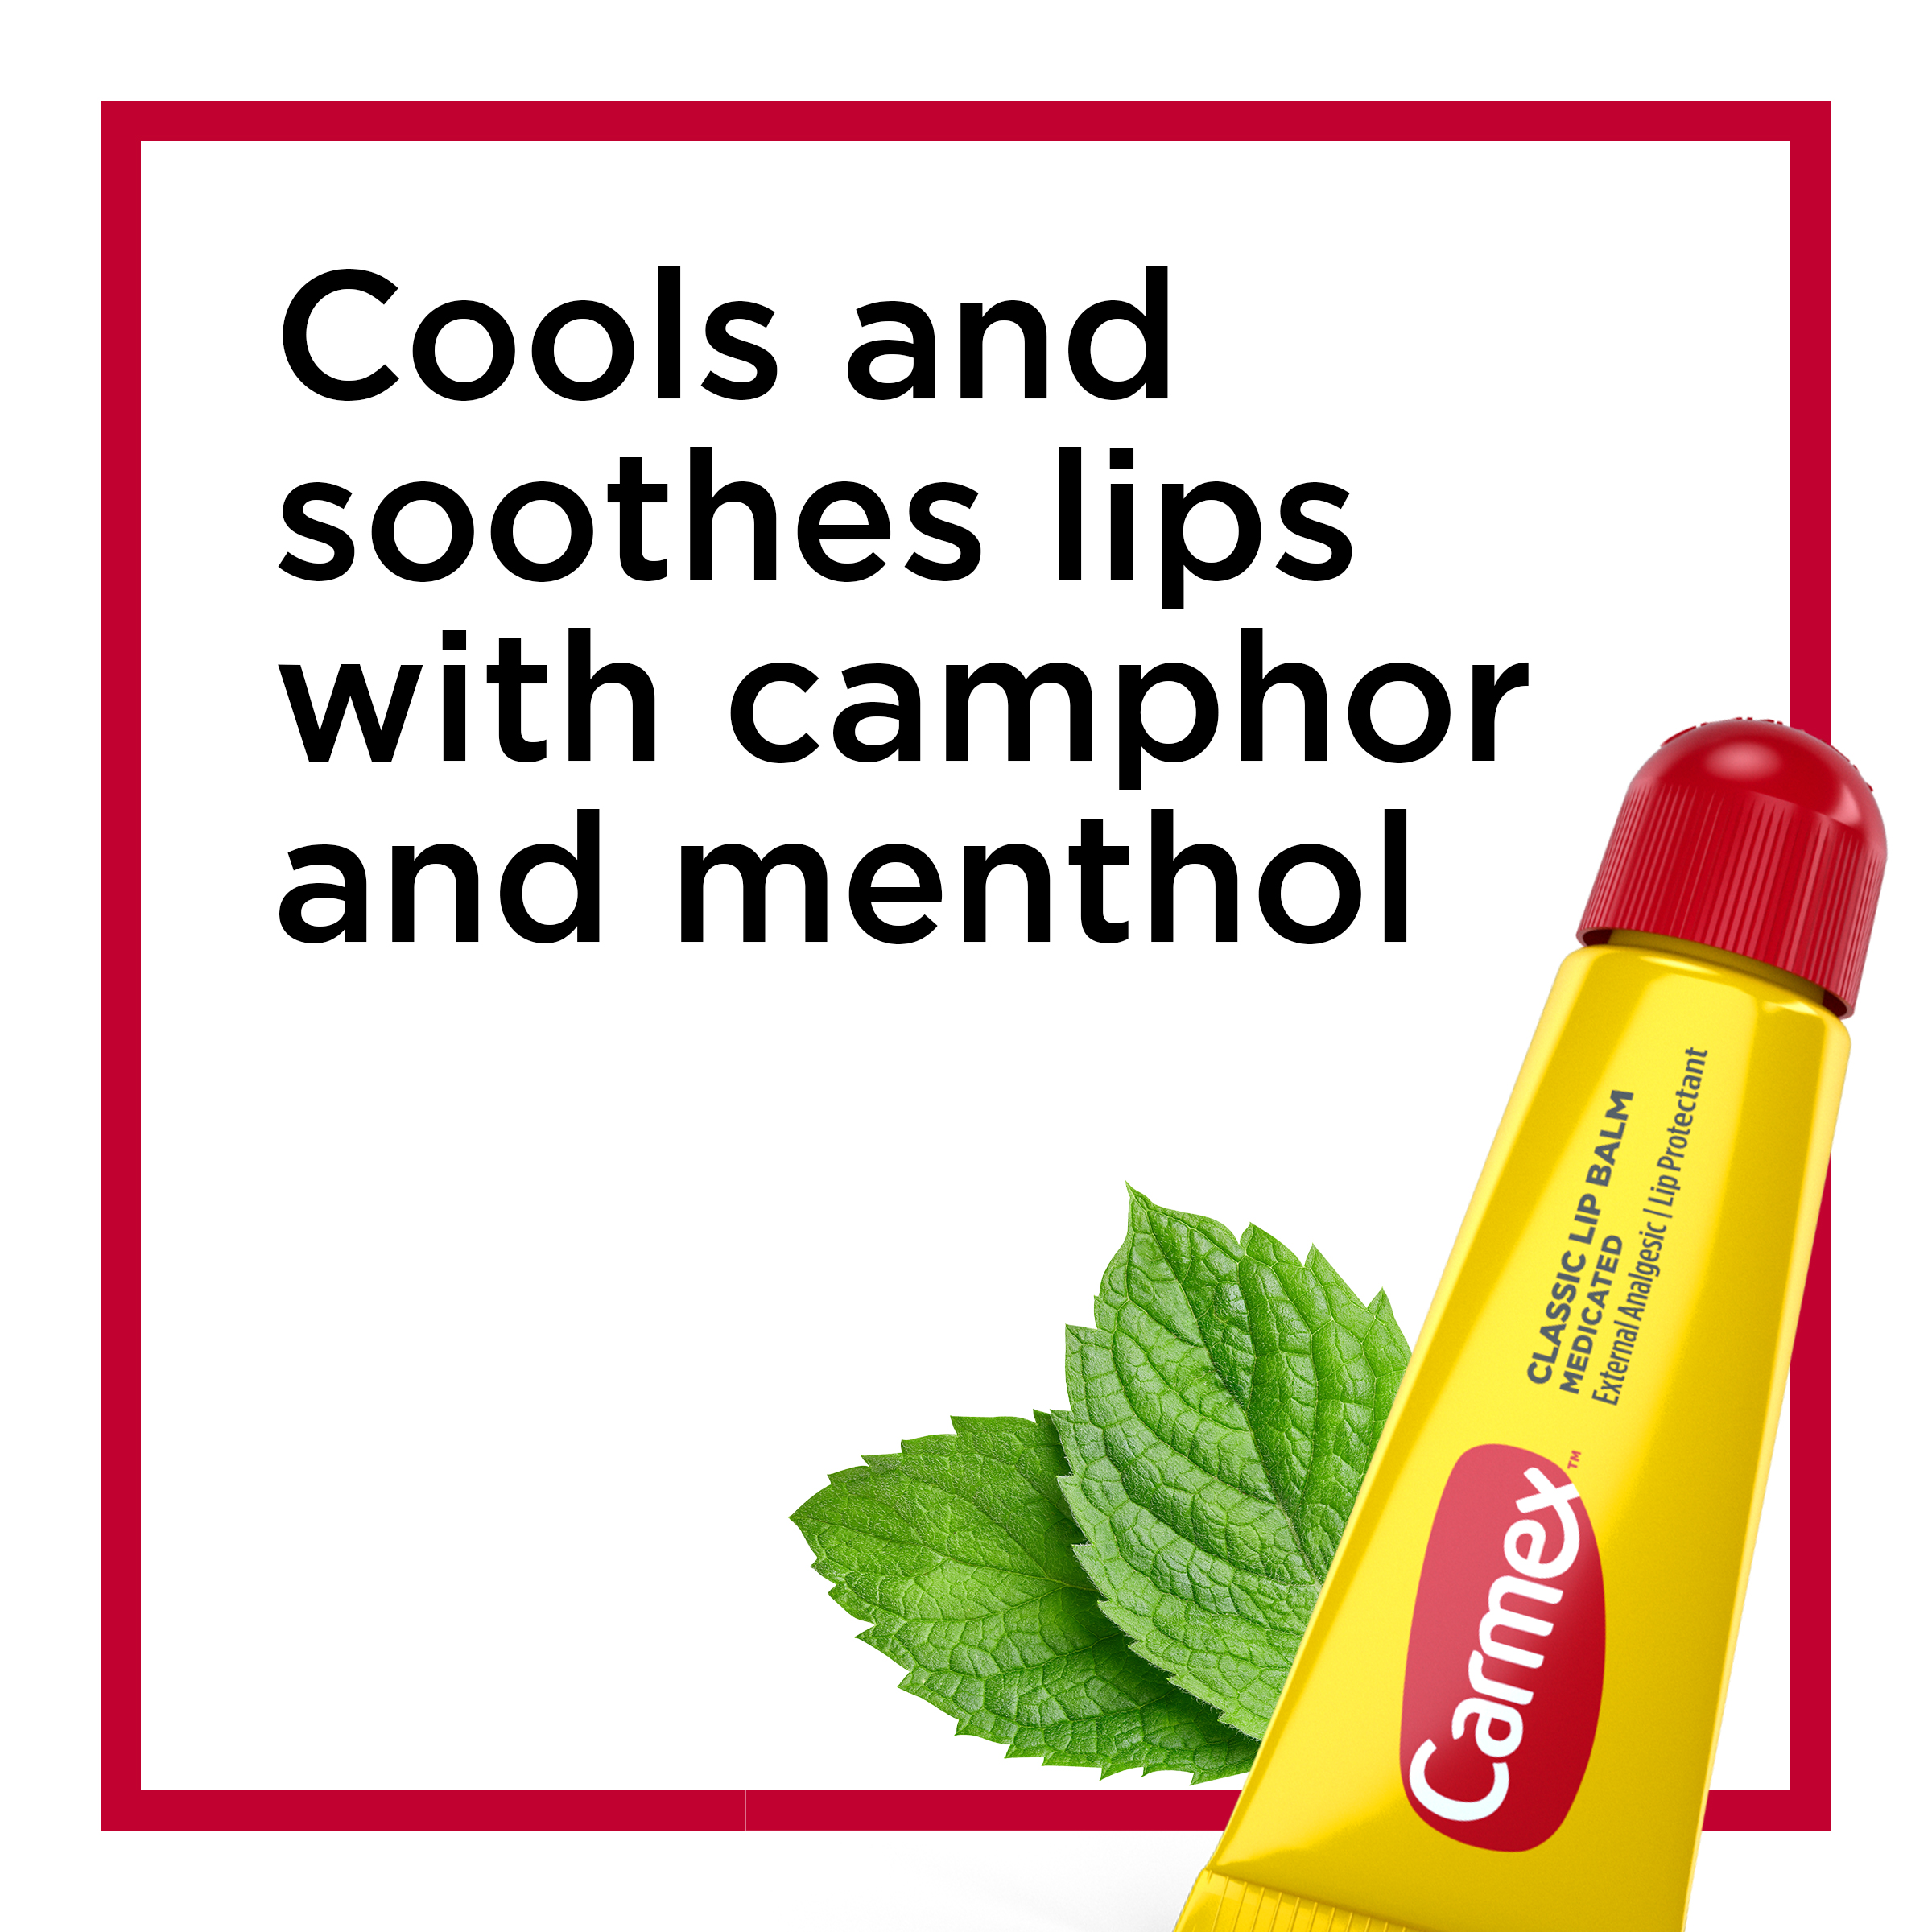 Carmex Classic Medicated Lip Balm Tubes, Lip Moisturizer, 3 Count (1 Pack of 3) - image 4 of 12